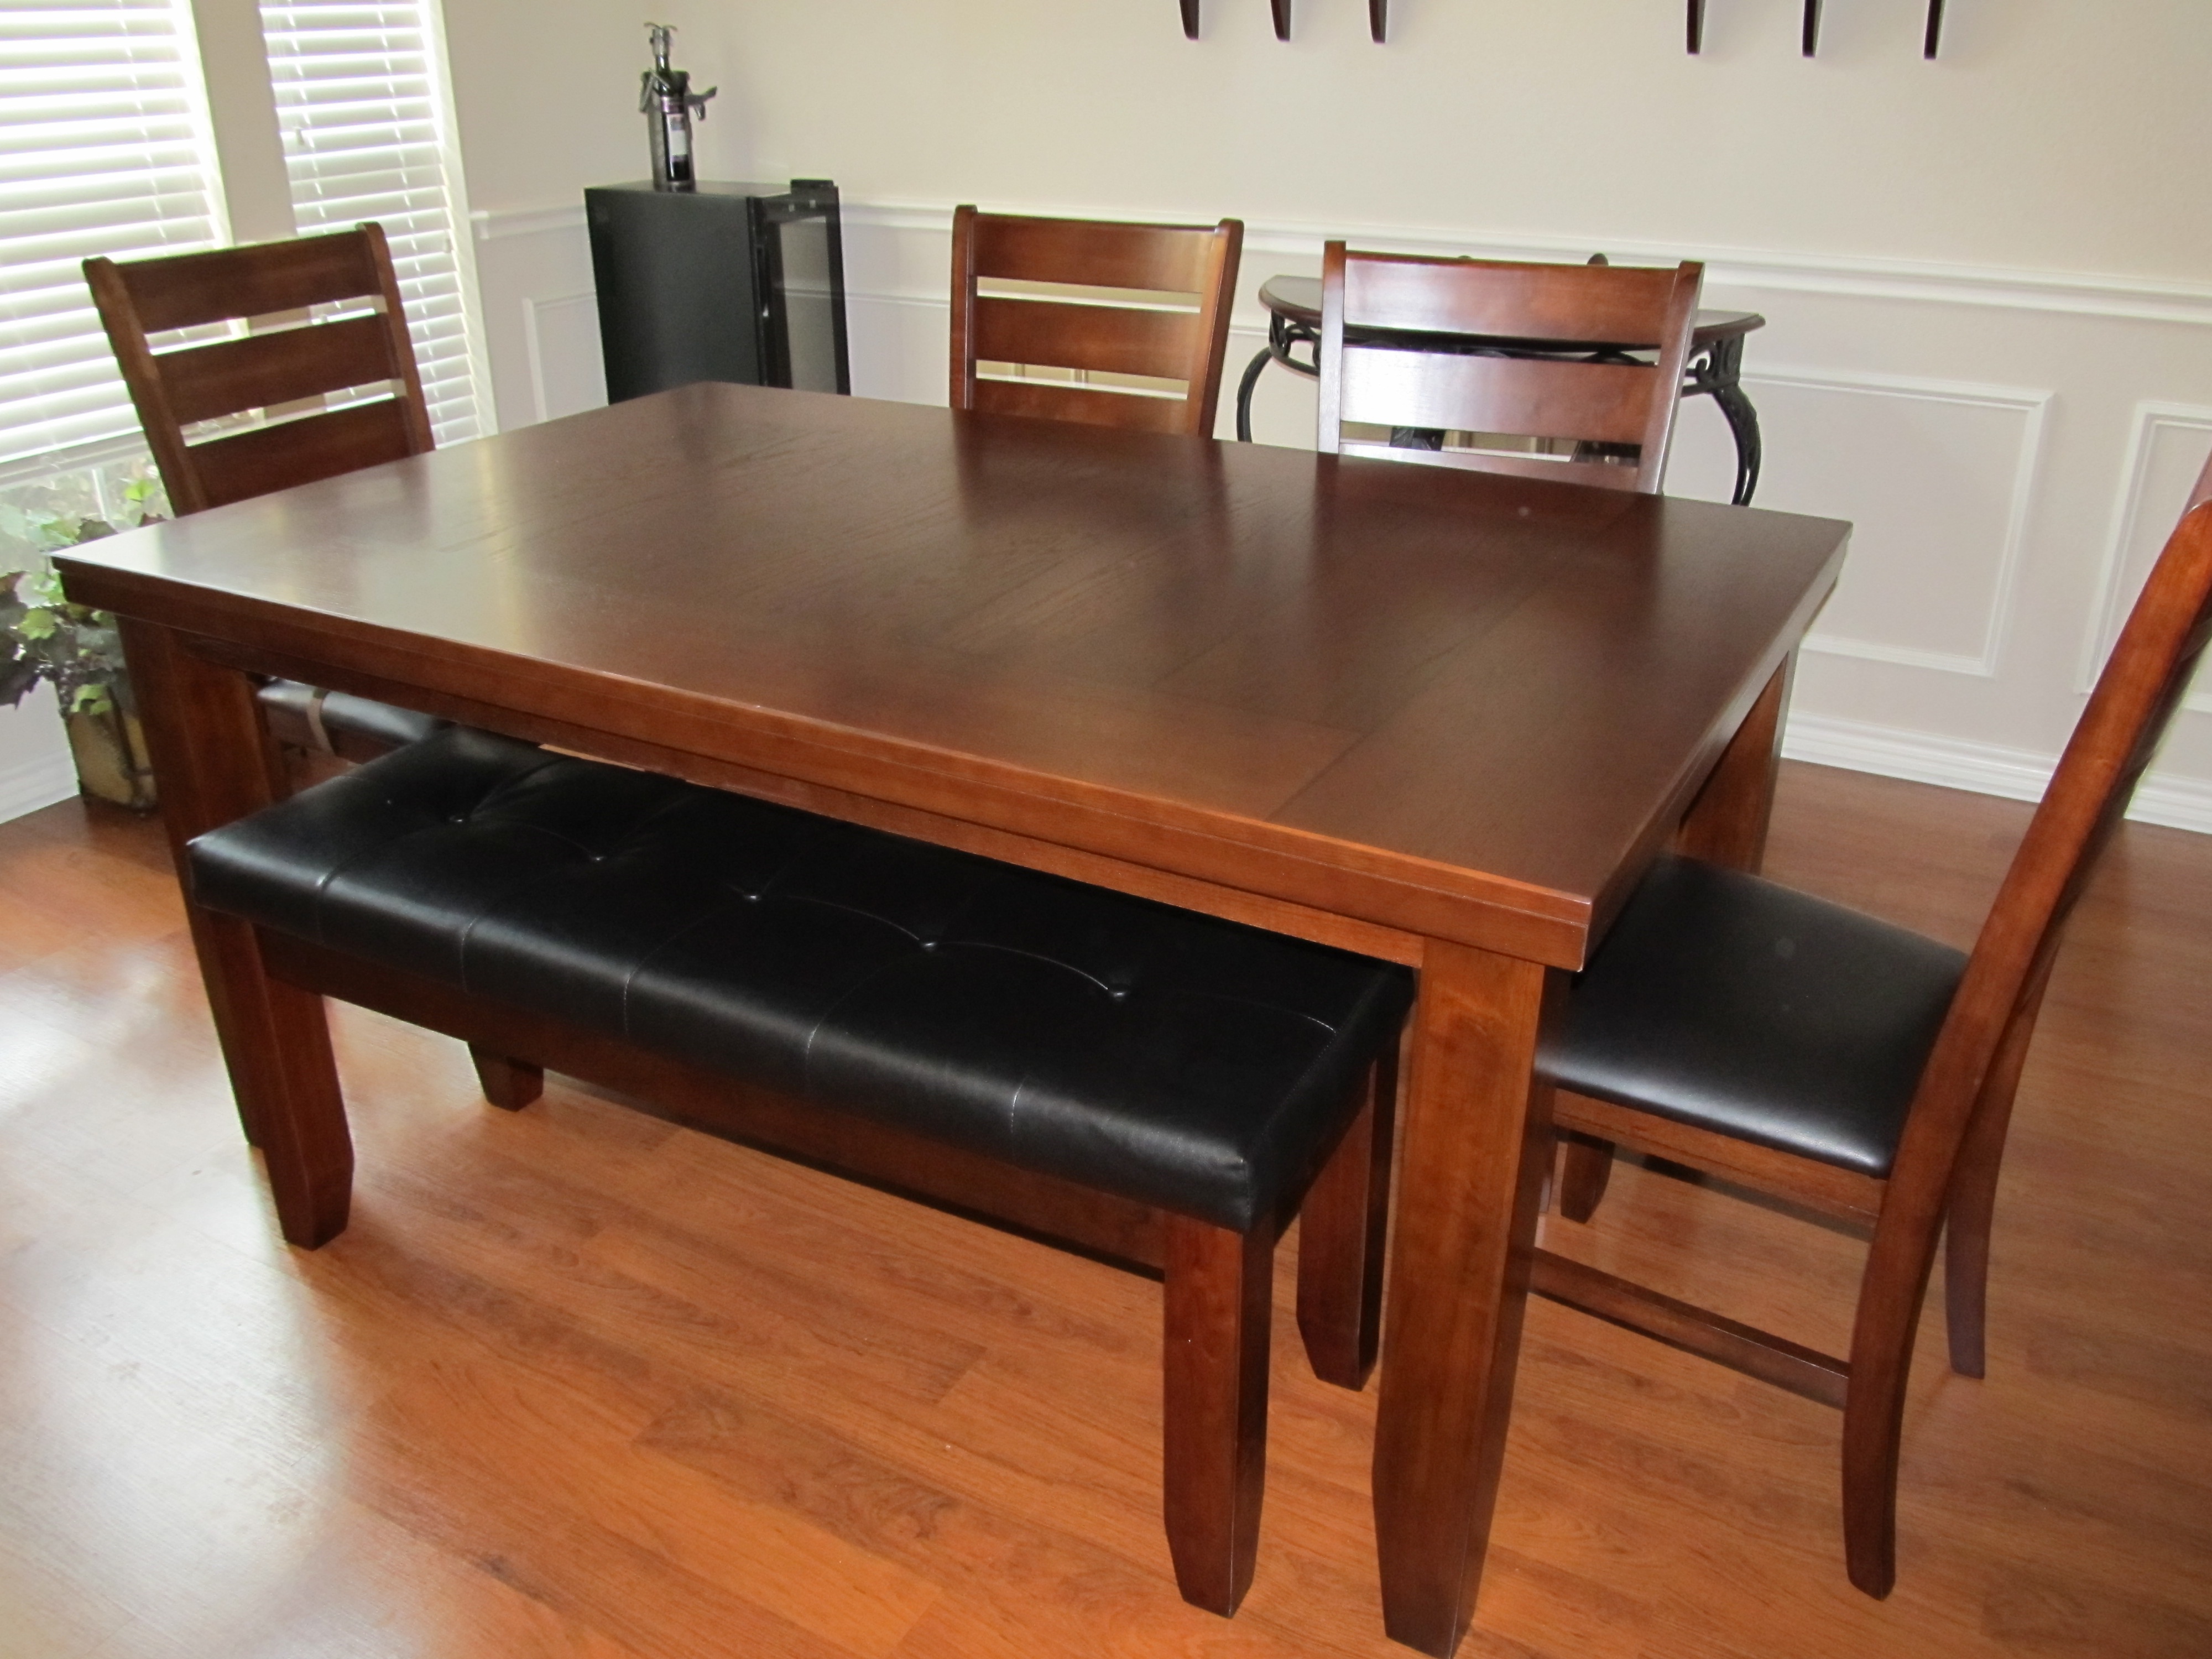 Bench Seats For Dining Room Table